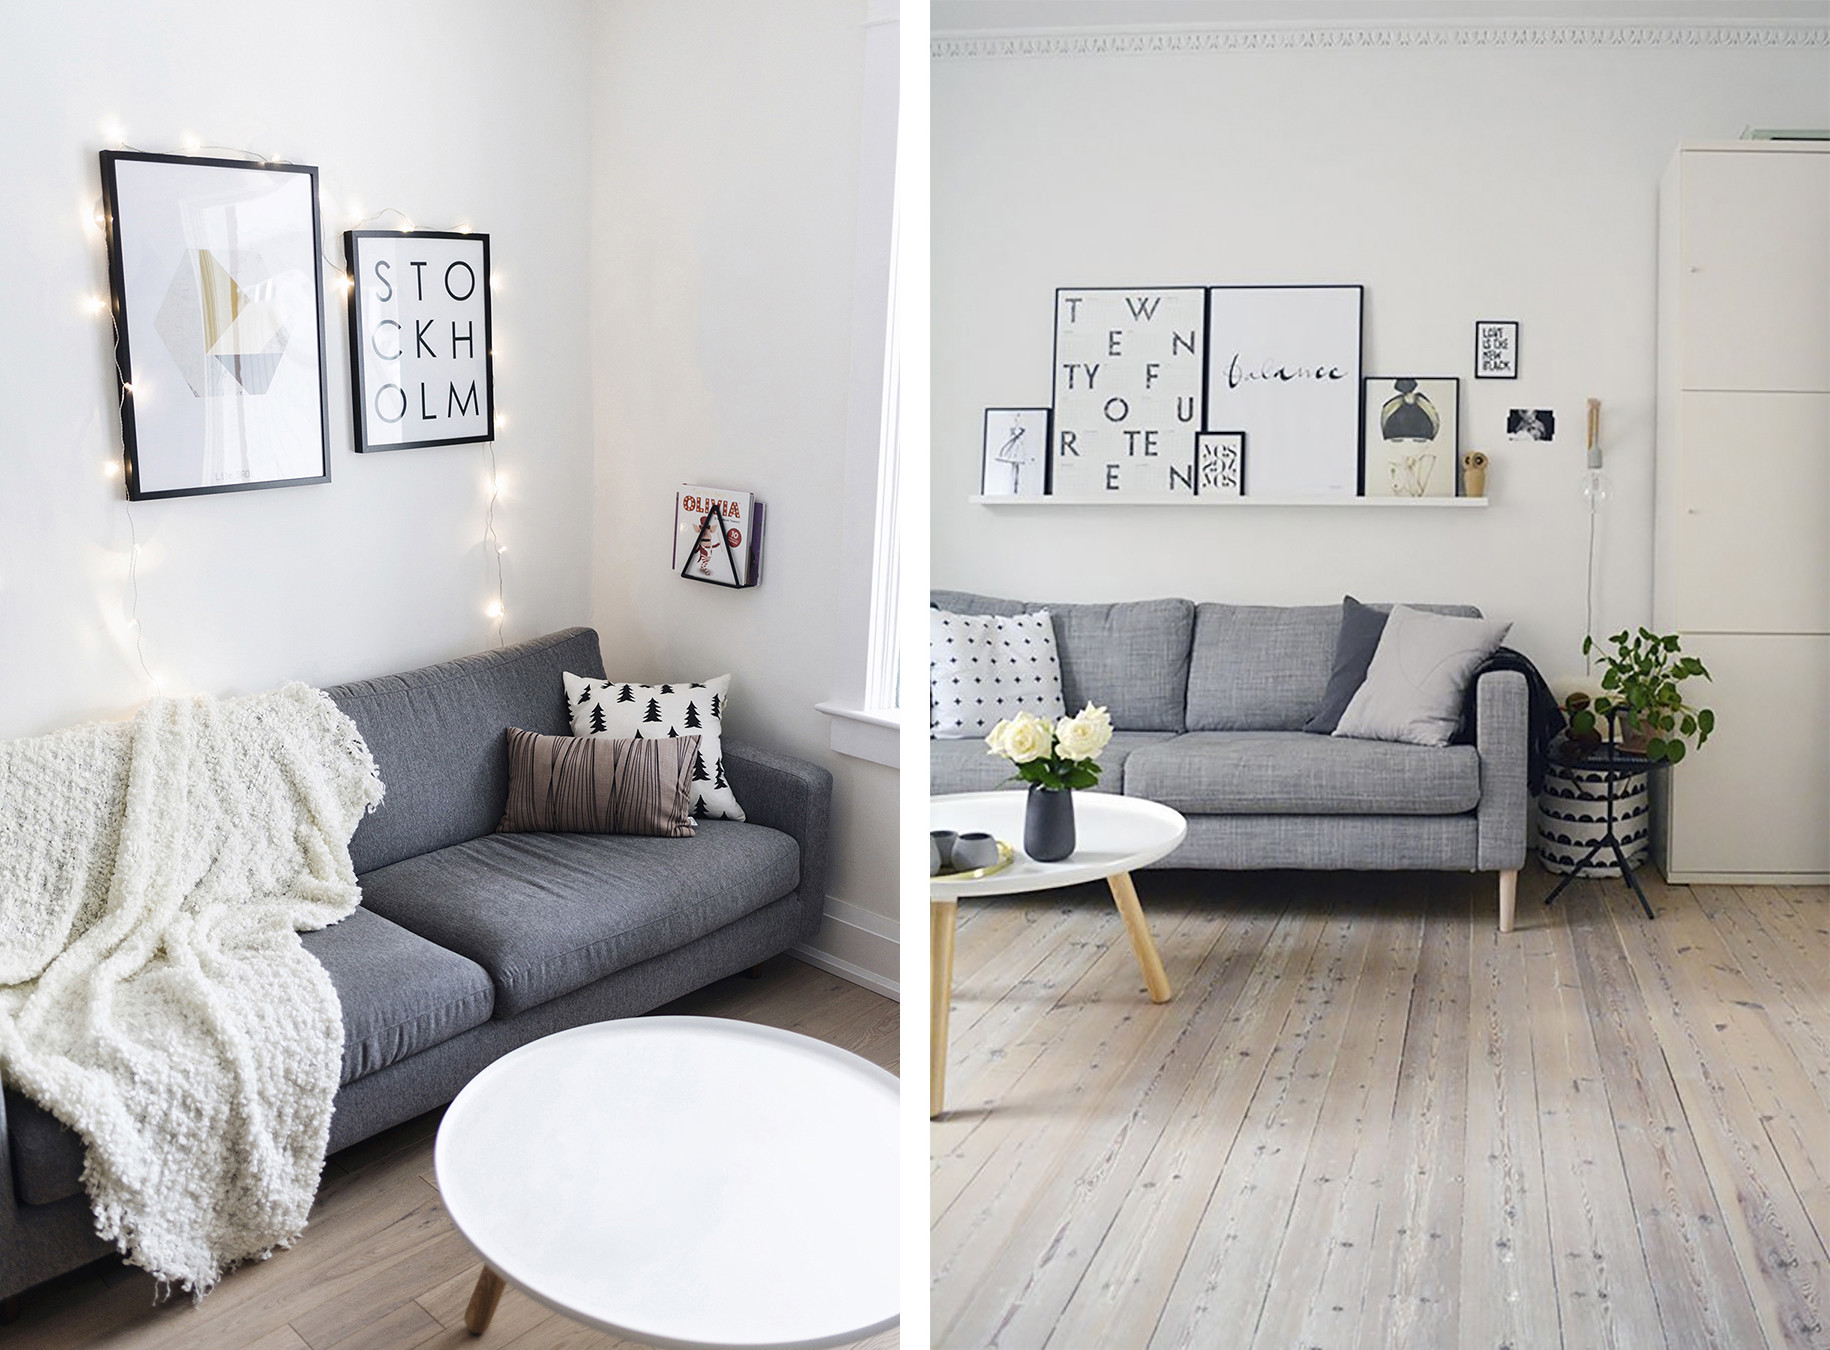 Grey Couch Living Room Decor
 Top 10 Tips for Adding Scandinavian Style to Your Home